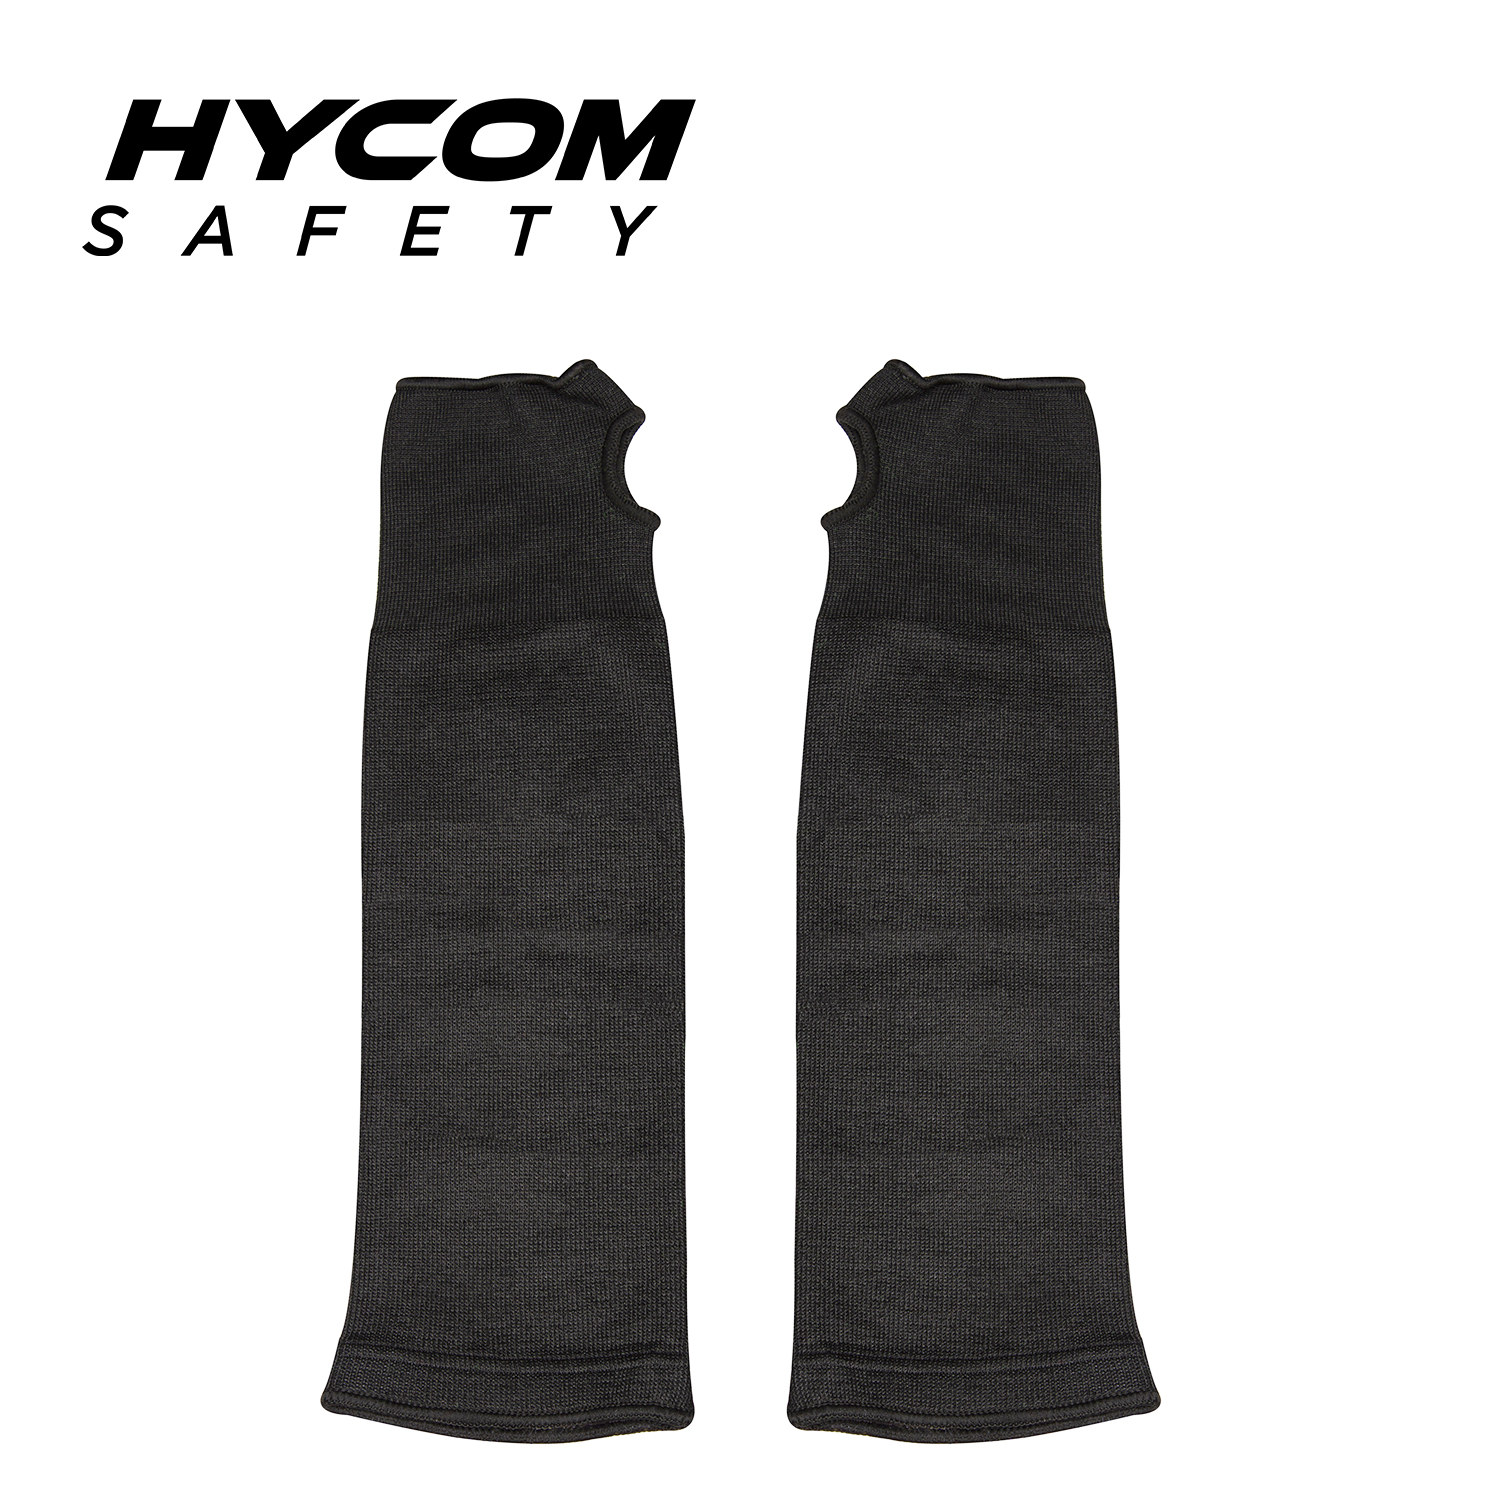 HYCOM Cut Level 4 Cut Resistant Arm Cover Sleeve with Thumb Slot For Work Safety